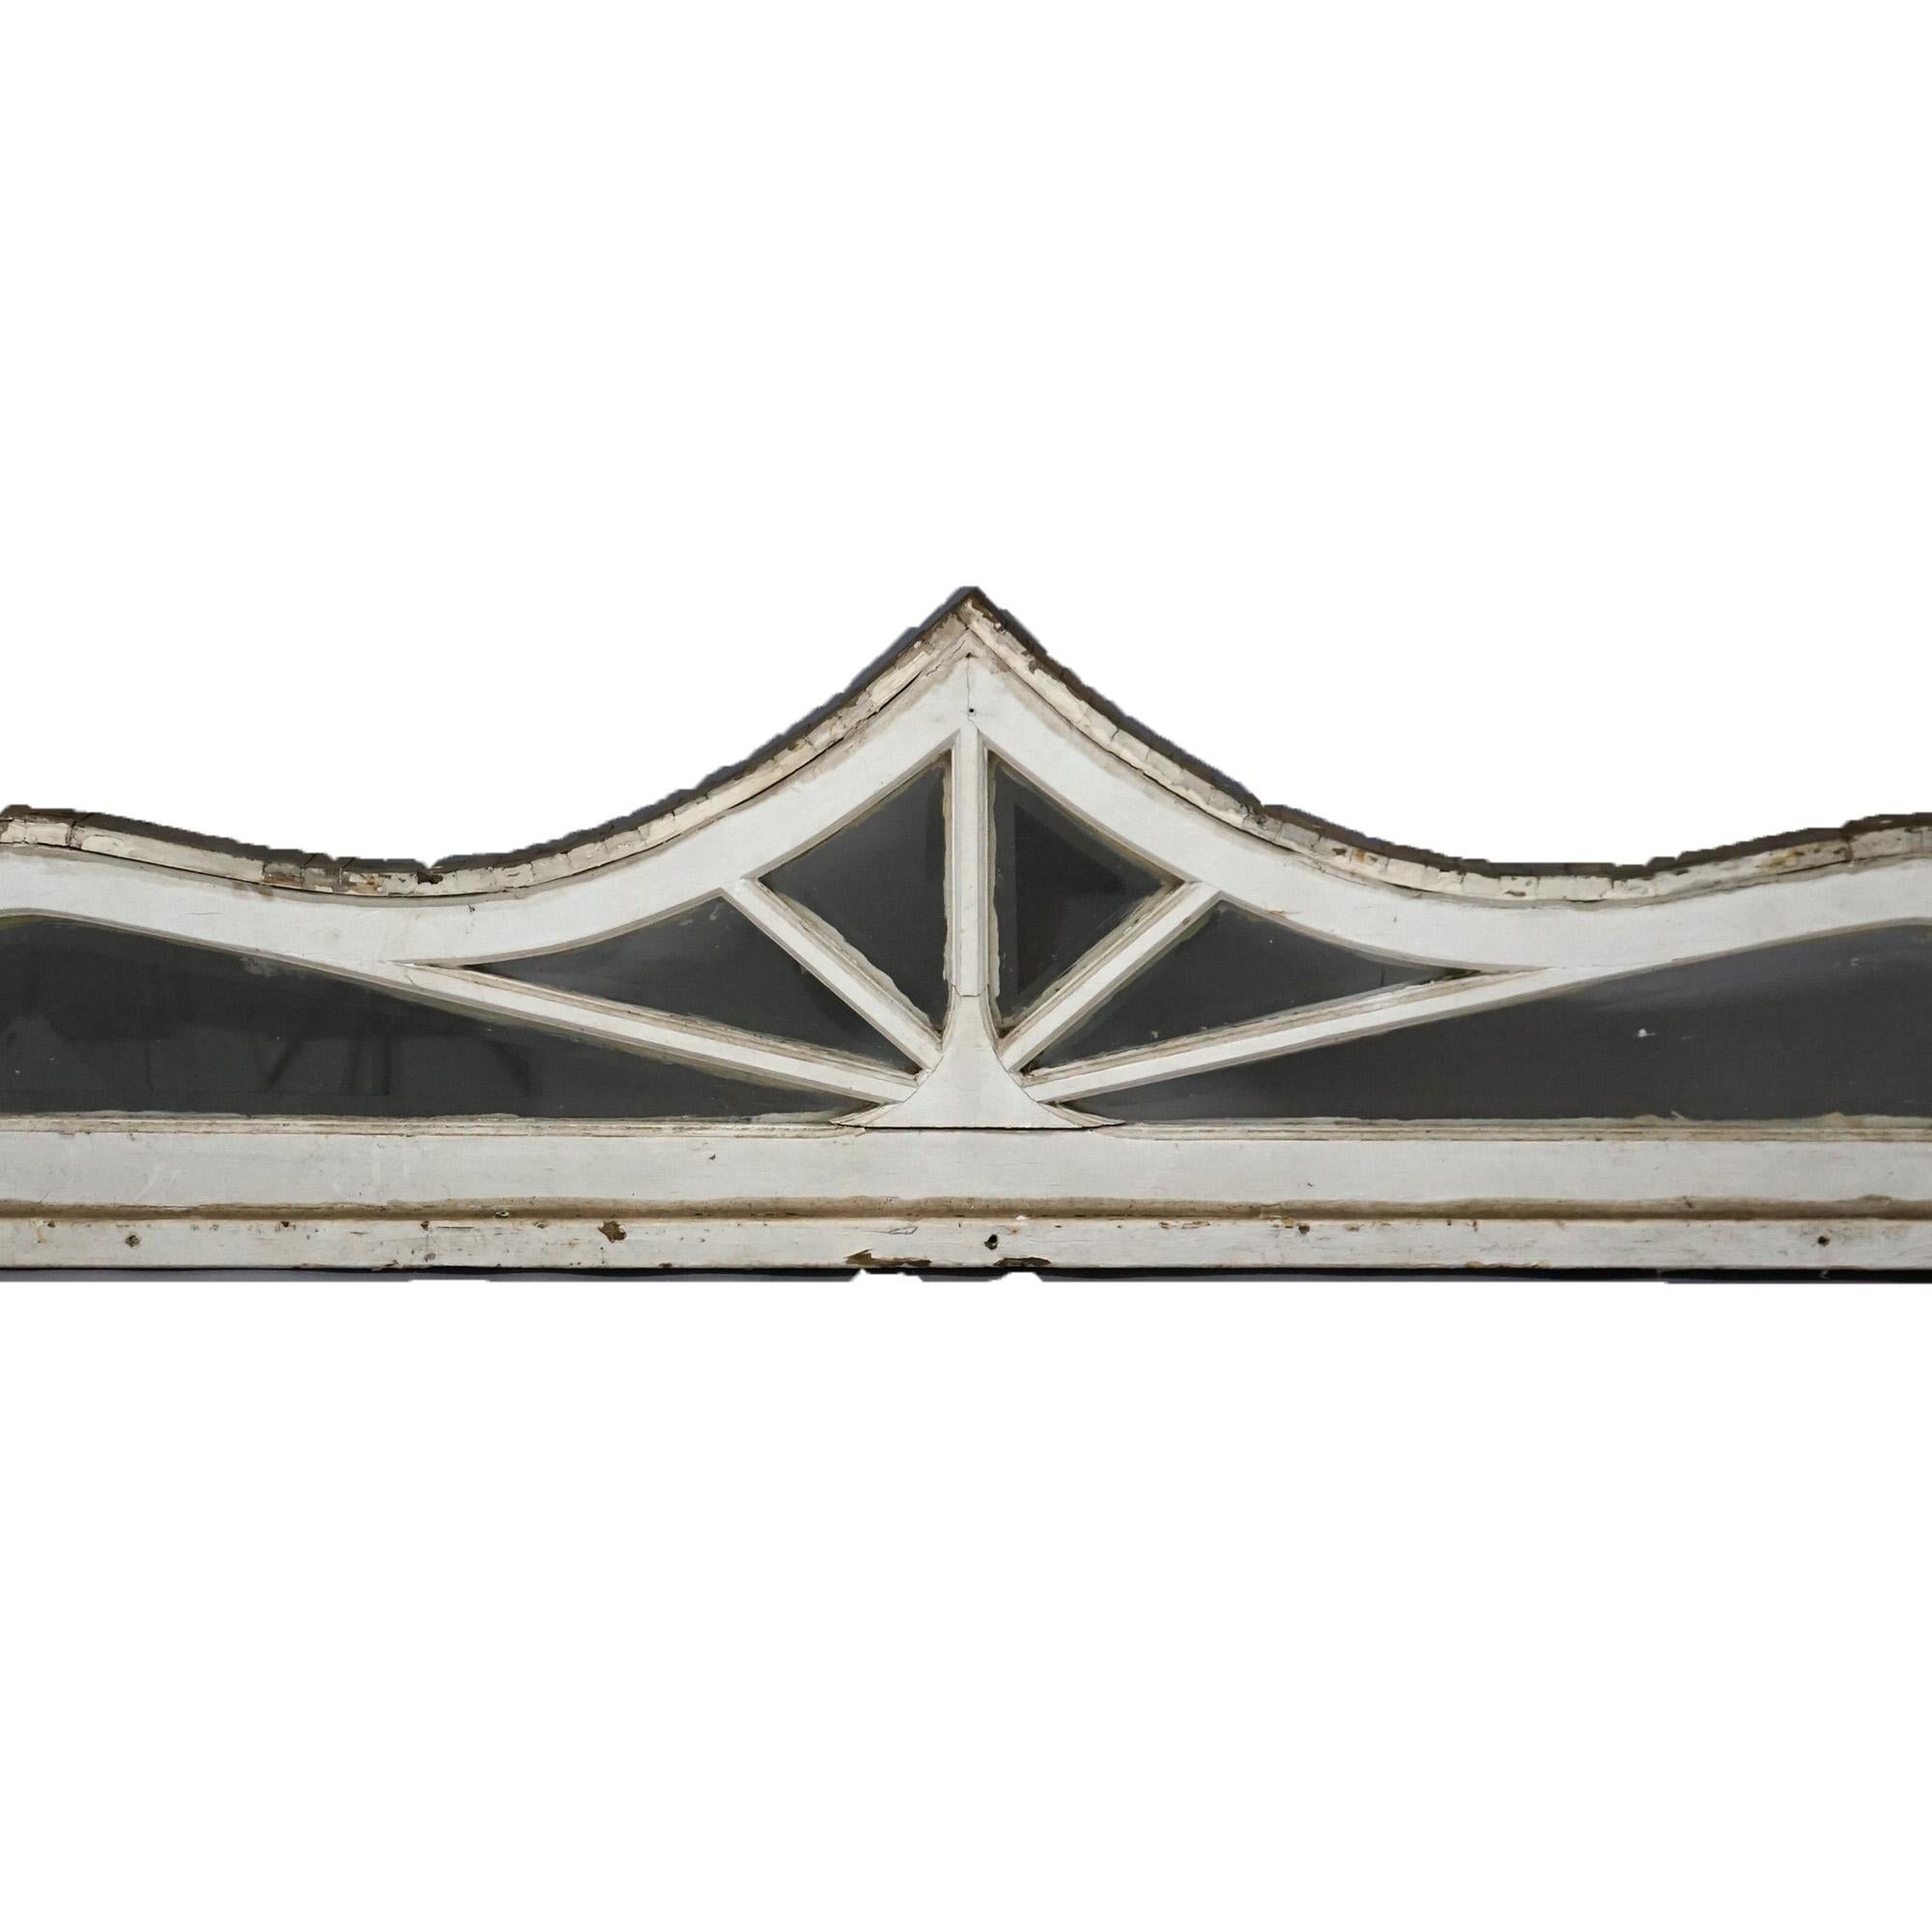 Arts and Crafts Antique Arts & Crafts Architectural Stylized Tear Drop Transom Window Circa 1910